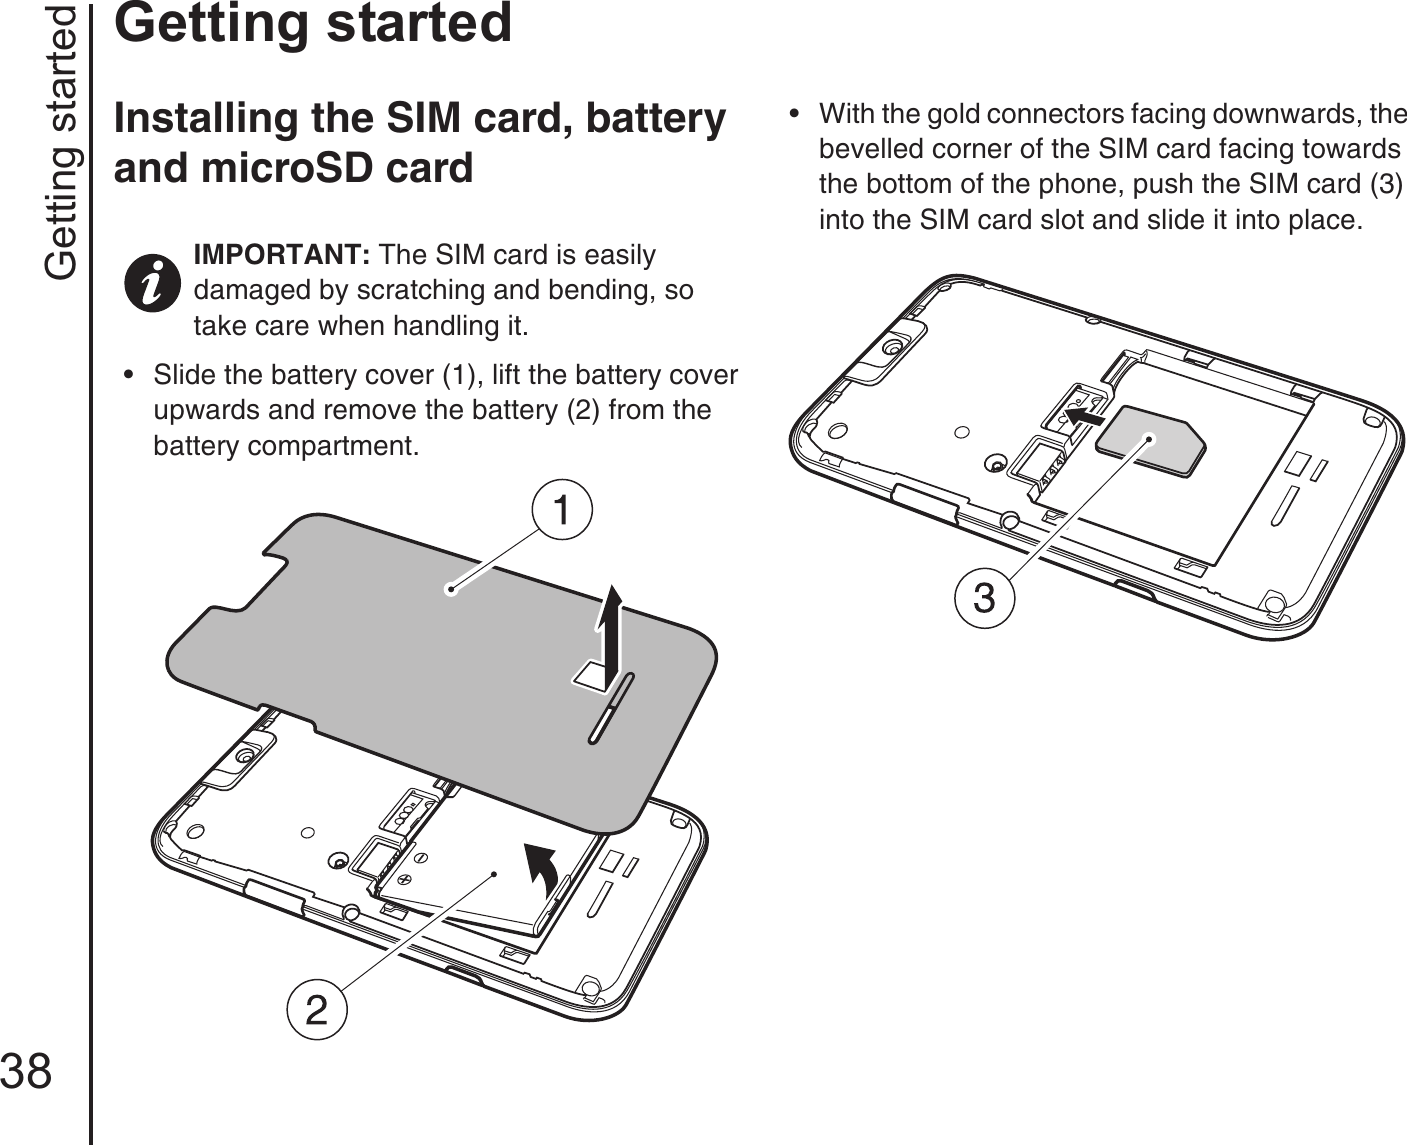 Getting started38Getting startedInstalling the SIM card, battery and microSD card• Slide the battery cover (1), lift the battery cover upwards and remove the battery (2) from the battery compartment.• With the gold connectors facing downwards, the bevelled corner of the SIM card facing towards the bottom of the phone, push the SIM card (3) into the SIM card slot and slide it into place.IMPORTANT: The SIM card is easily damaged by scratching and bending, so take care when handling it.